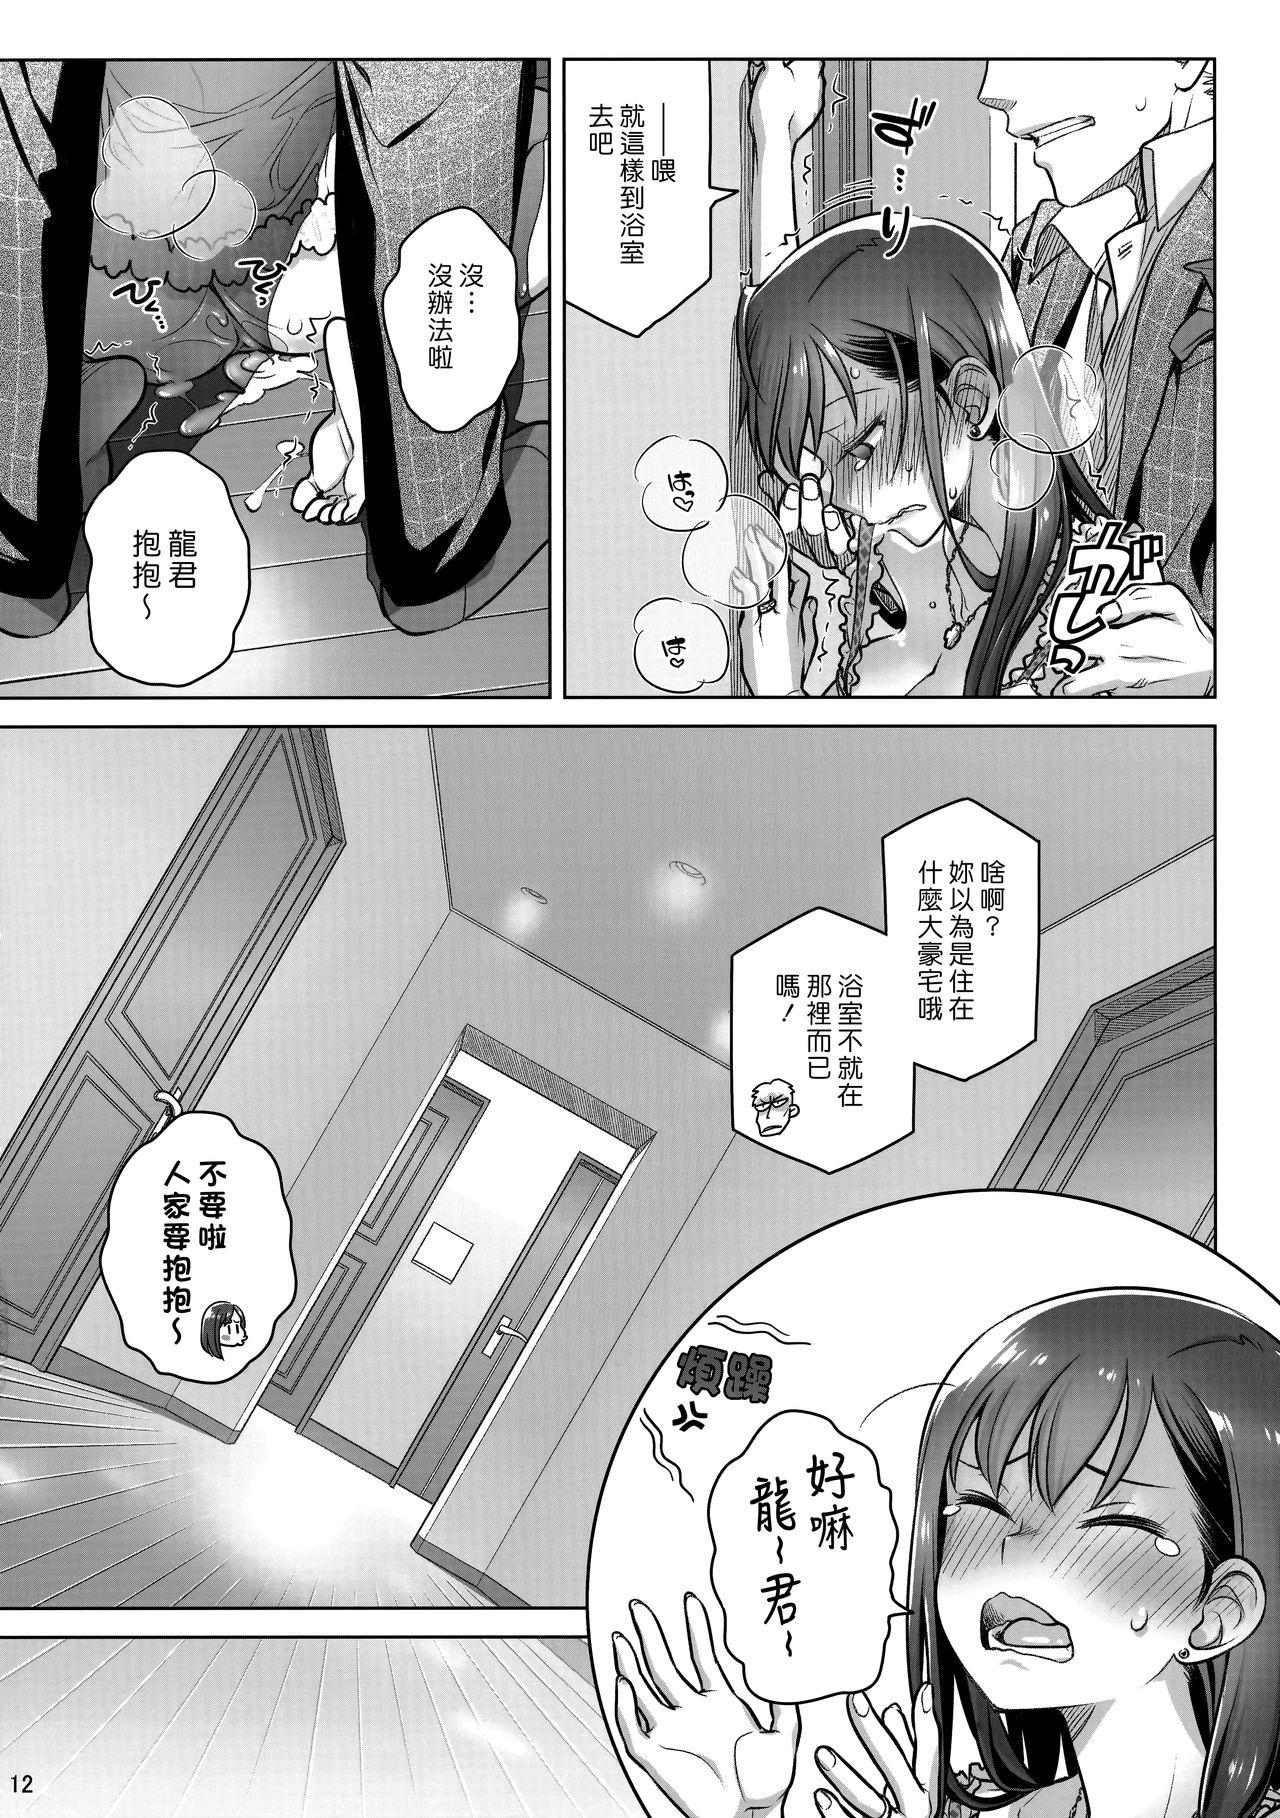 Red Head Stay by MeㆍBangaihen - Original Thai - Page 10